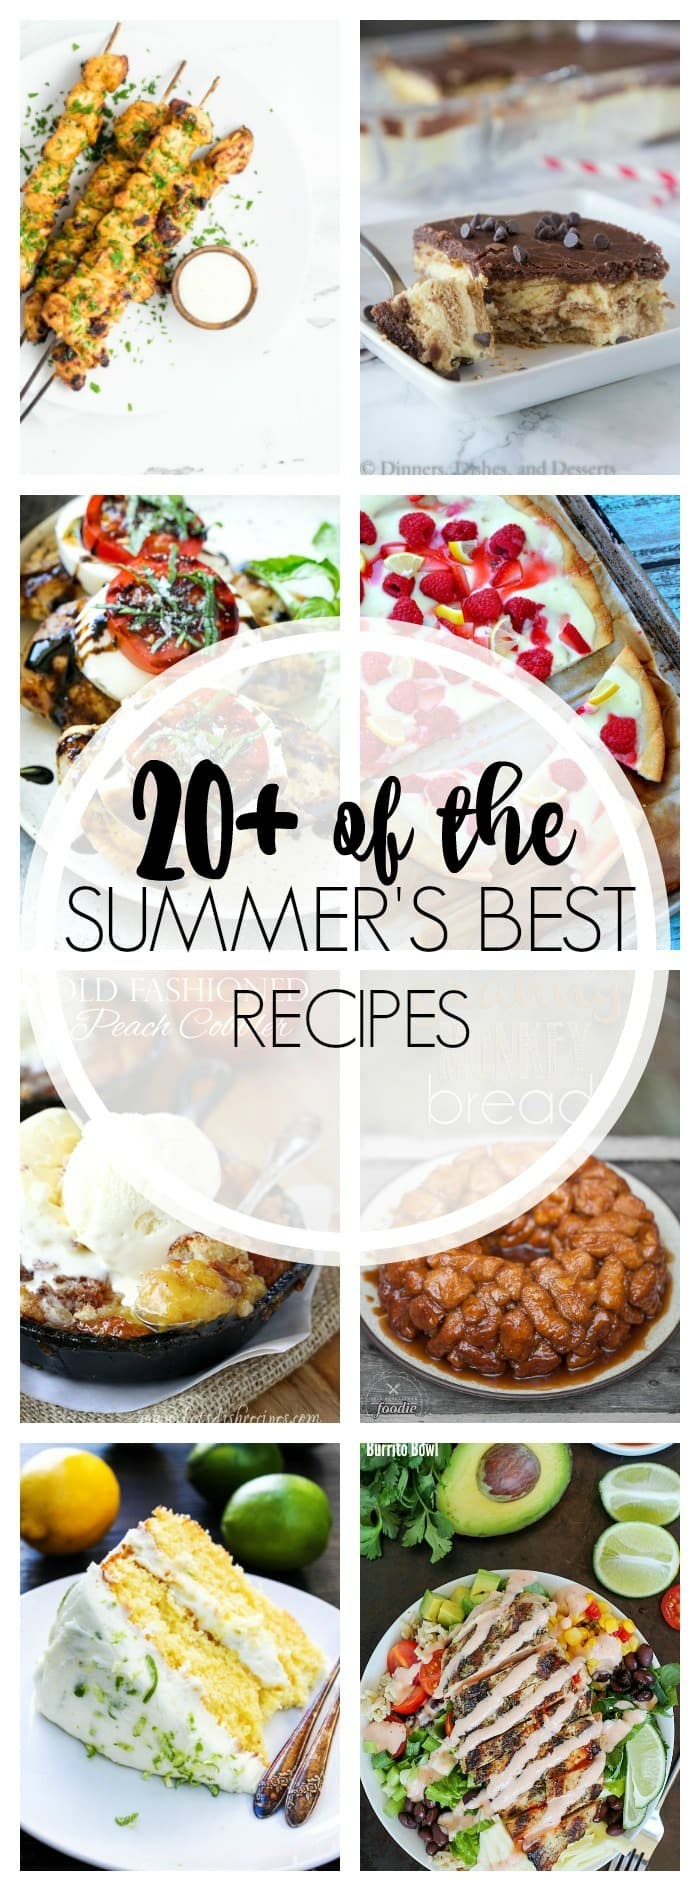 20+ Perfect Summer Recipes to end a perfect summer! From breakfast to dessert, I've got you covered with some of the best summer food around! Check it out!